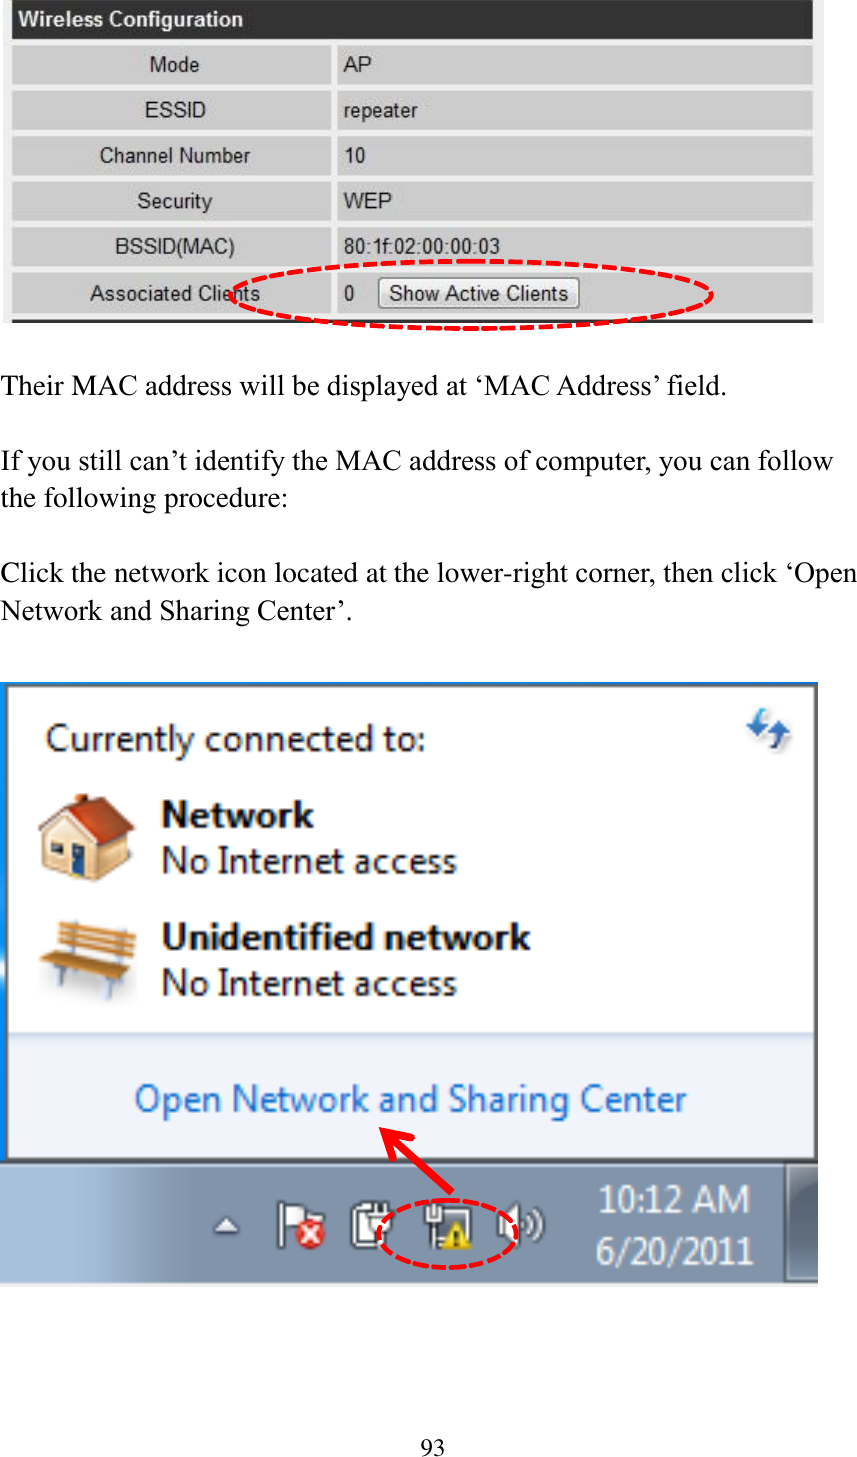 93    Their MAC address will be displayed at „MAC Address‟ field.  If you still can‟t identify the MAC address of computer, you can follow the following procedure:  Click the network icon located at the lower-right corner, then click „Open Network and Sharing Center‟.       